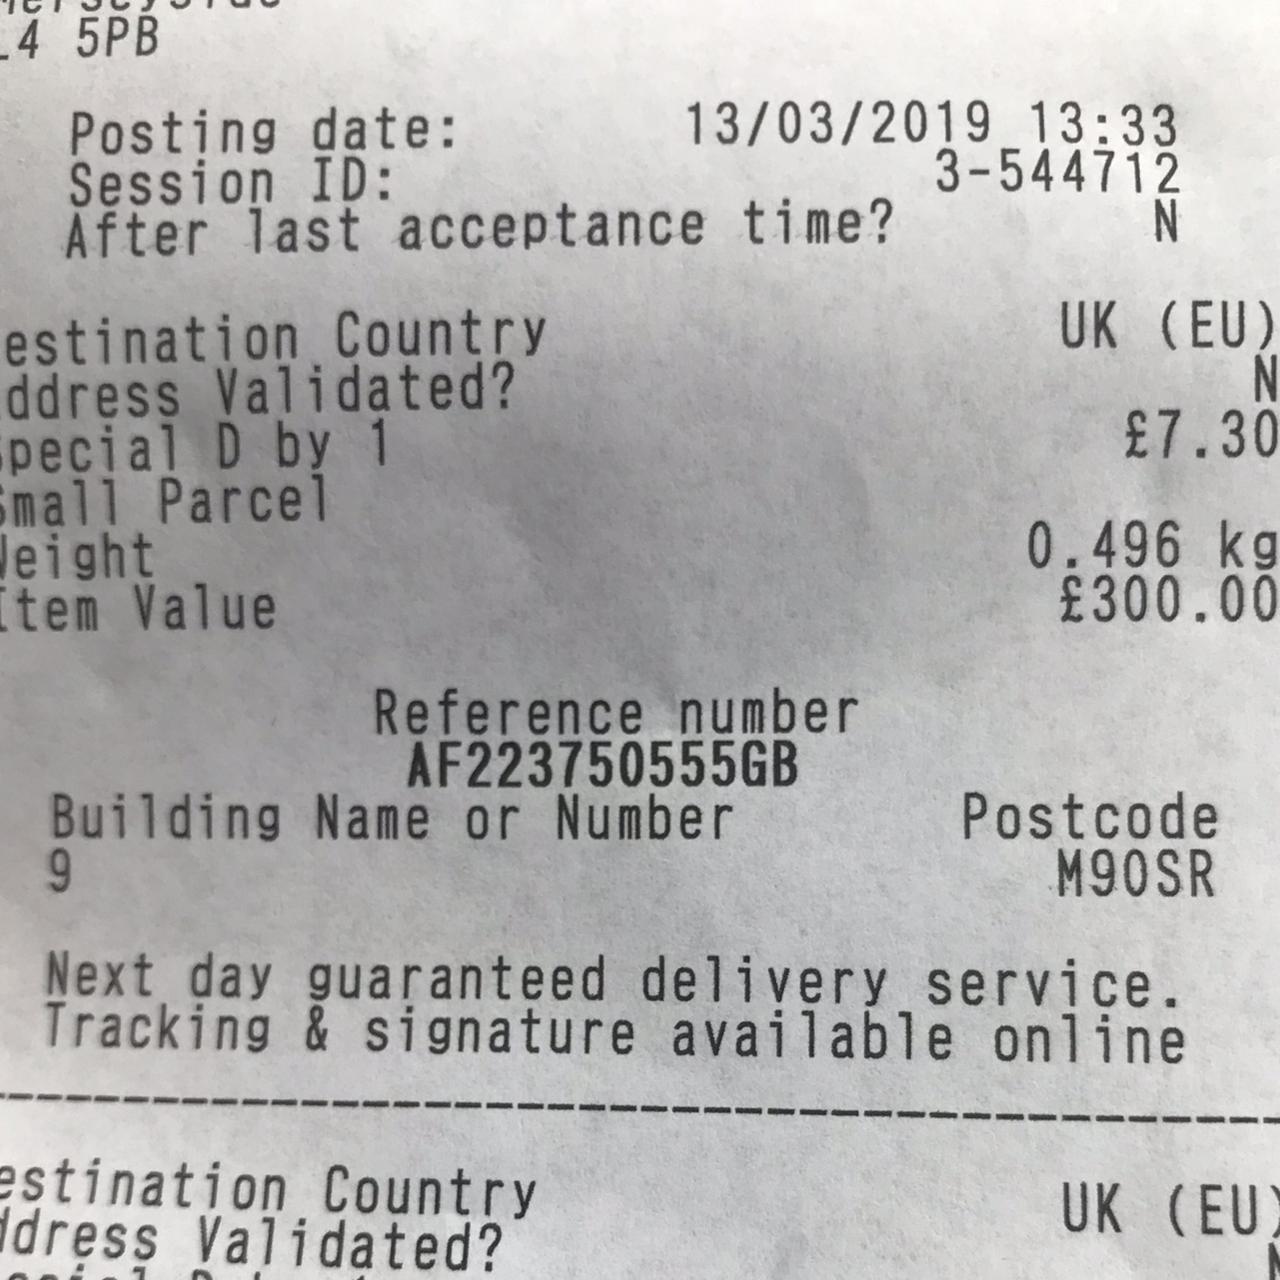 Louis Vuitton receipt for proof that it is real. - Depop